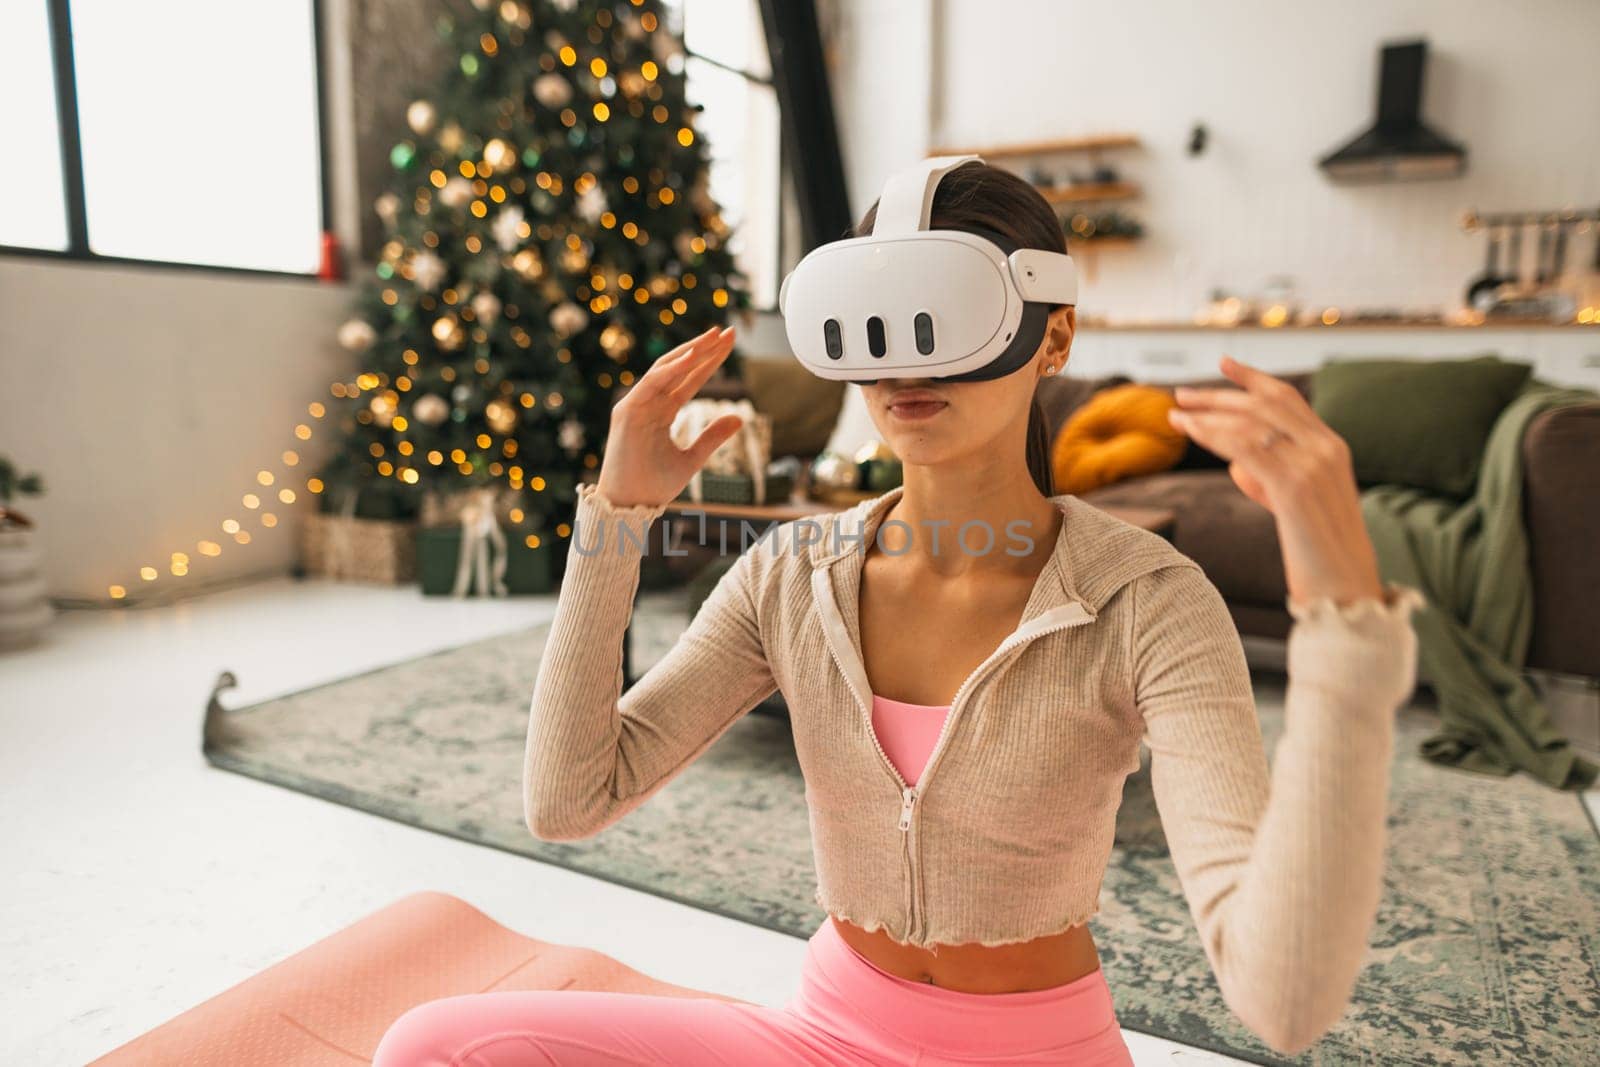 The woman practices yoga wearing pink athletic wear and VR goggles. by teksomolika